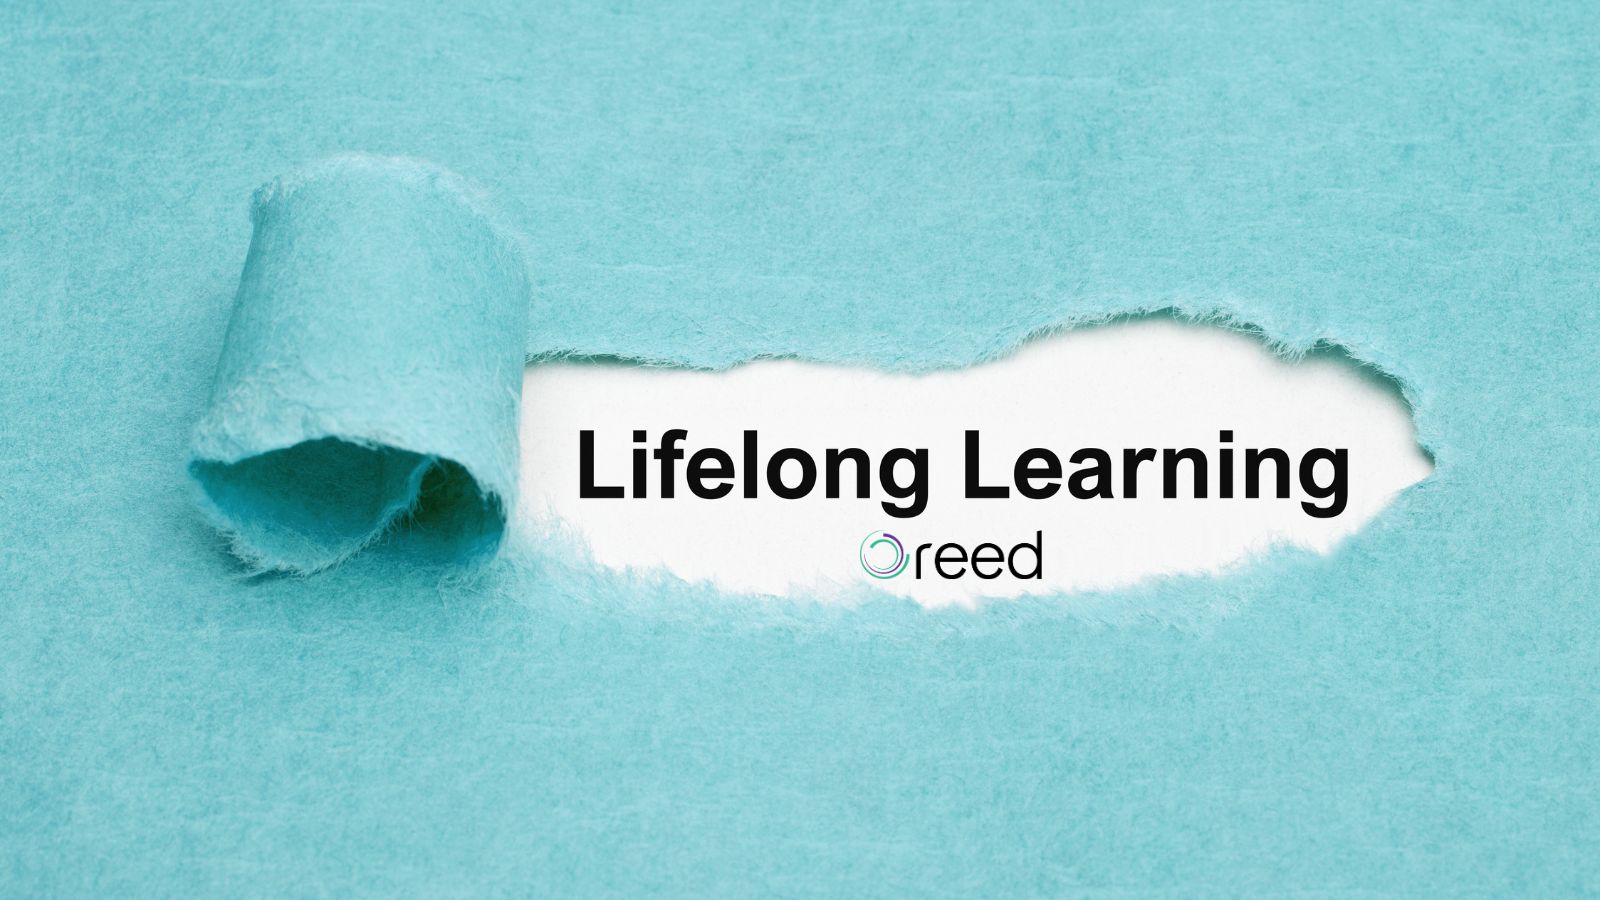 How do aptitude and attitude relate to lifelong learning?